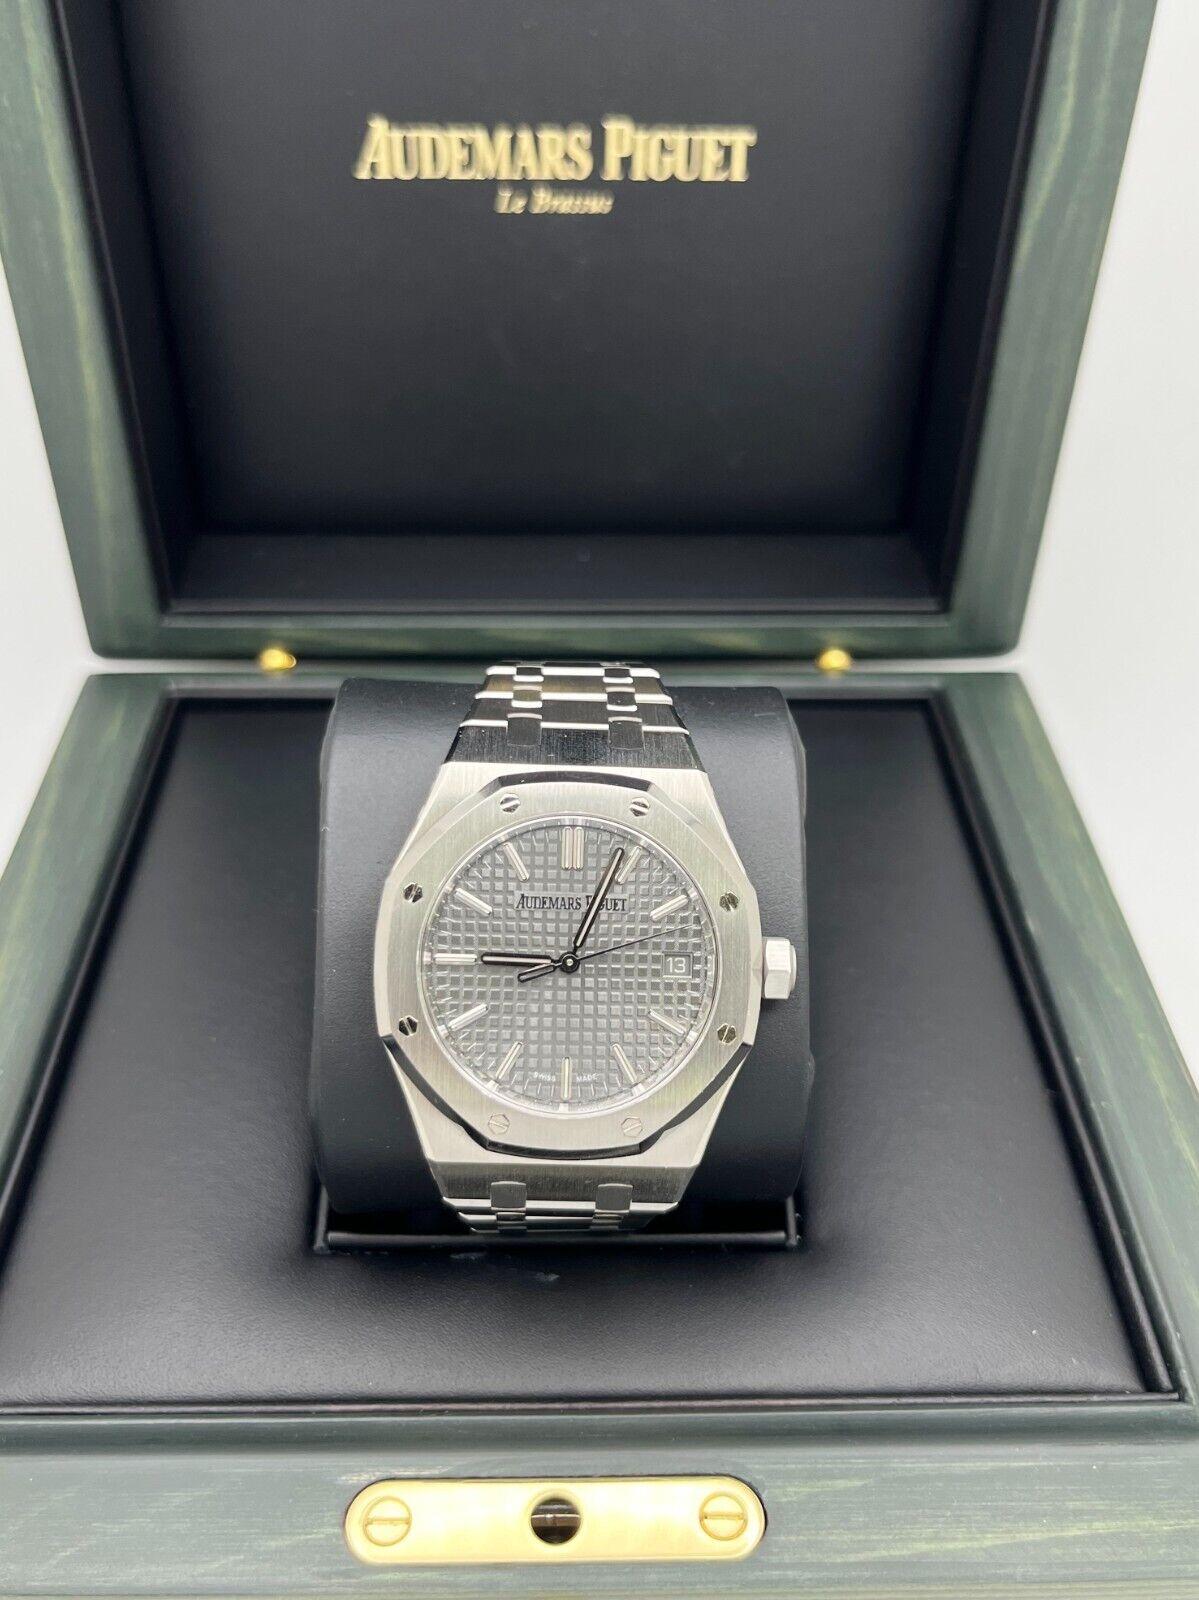 Audemars Piguet 15550ST.OO.1356ST.03 Grey Dial Stainless Steel Box Paper In Excellent Condition For Sale In San Diego, CA